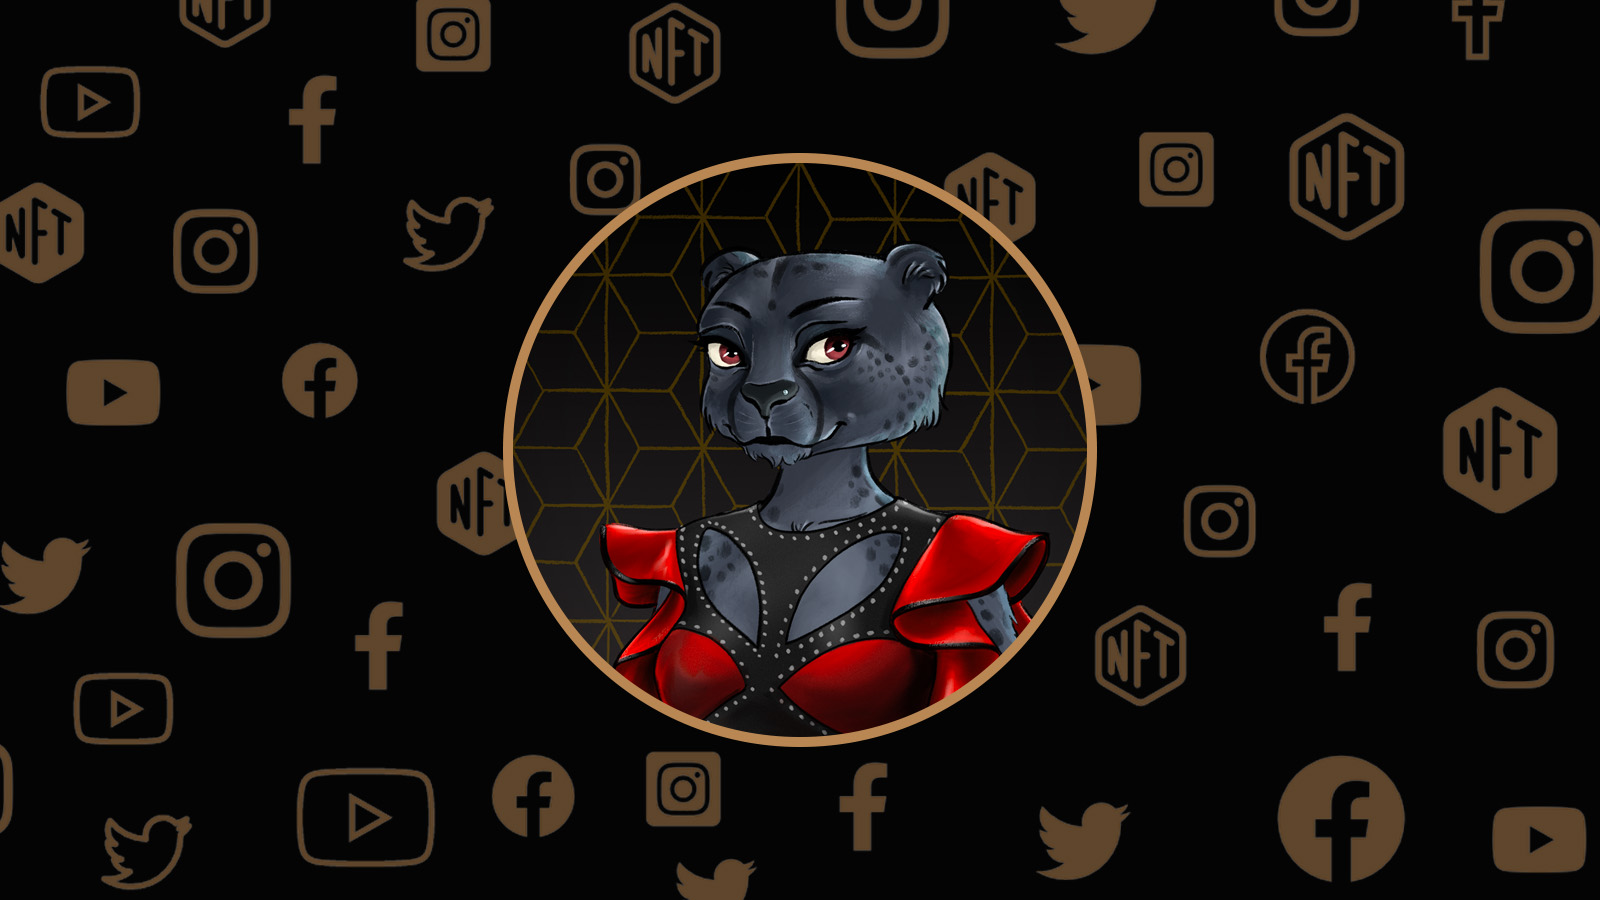 A black cheetah cat with a red flamenco dress with leather studded trim. The background shows icons for social media platforms.